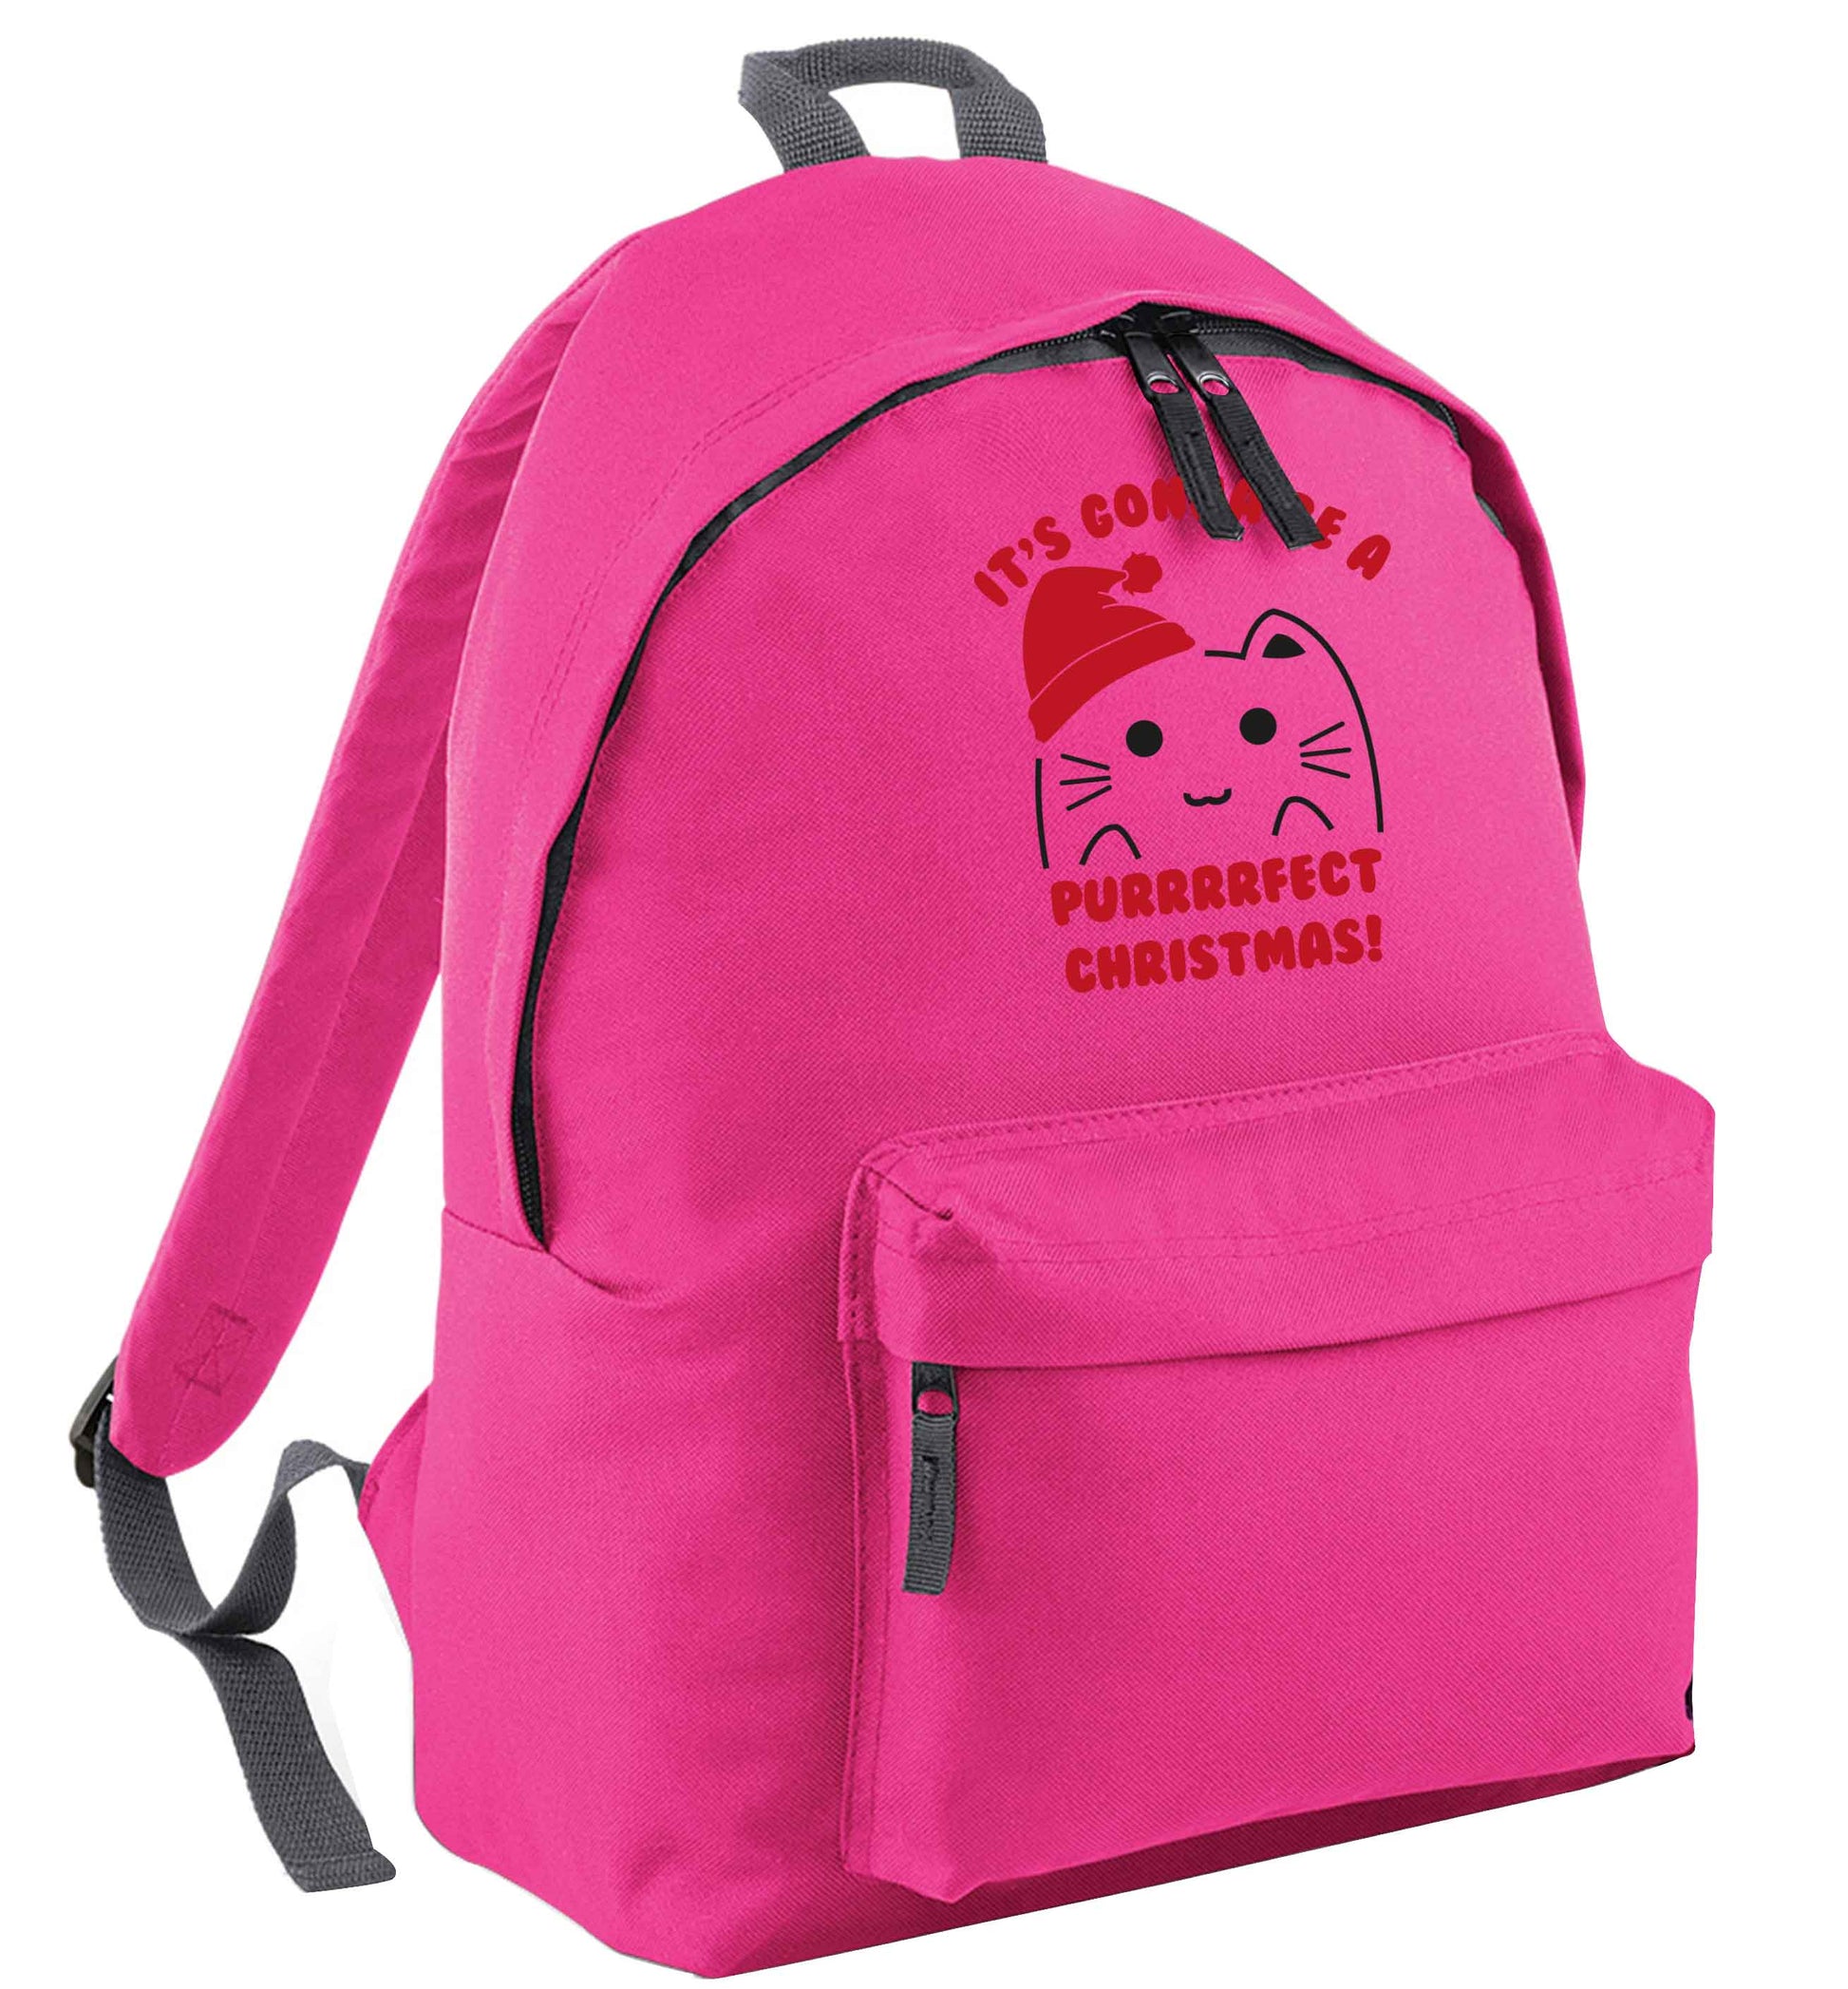 It's going to be a purrfect Christmas pink adults backpack